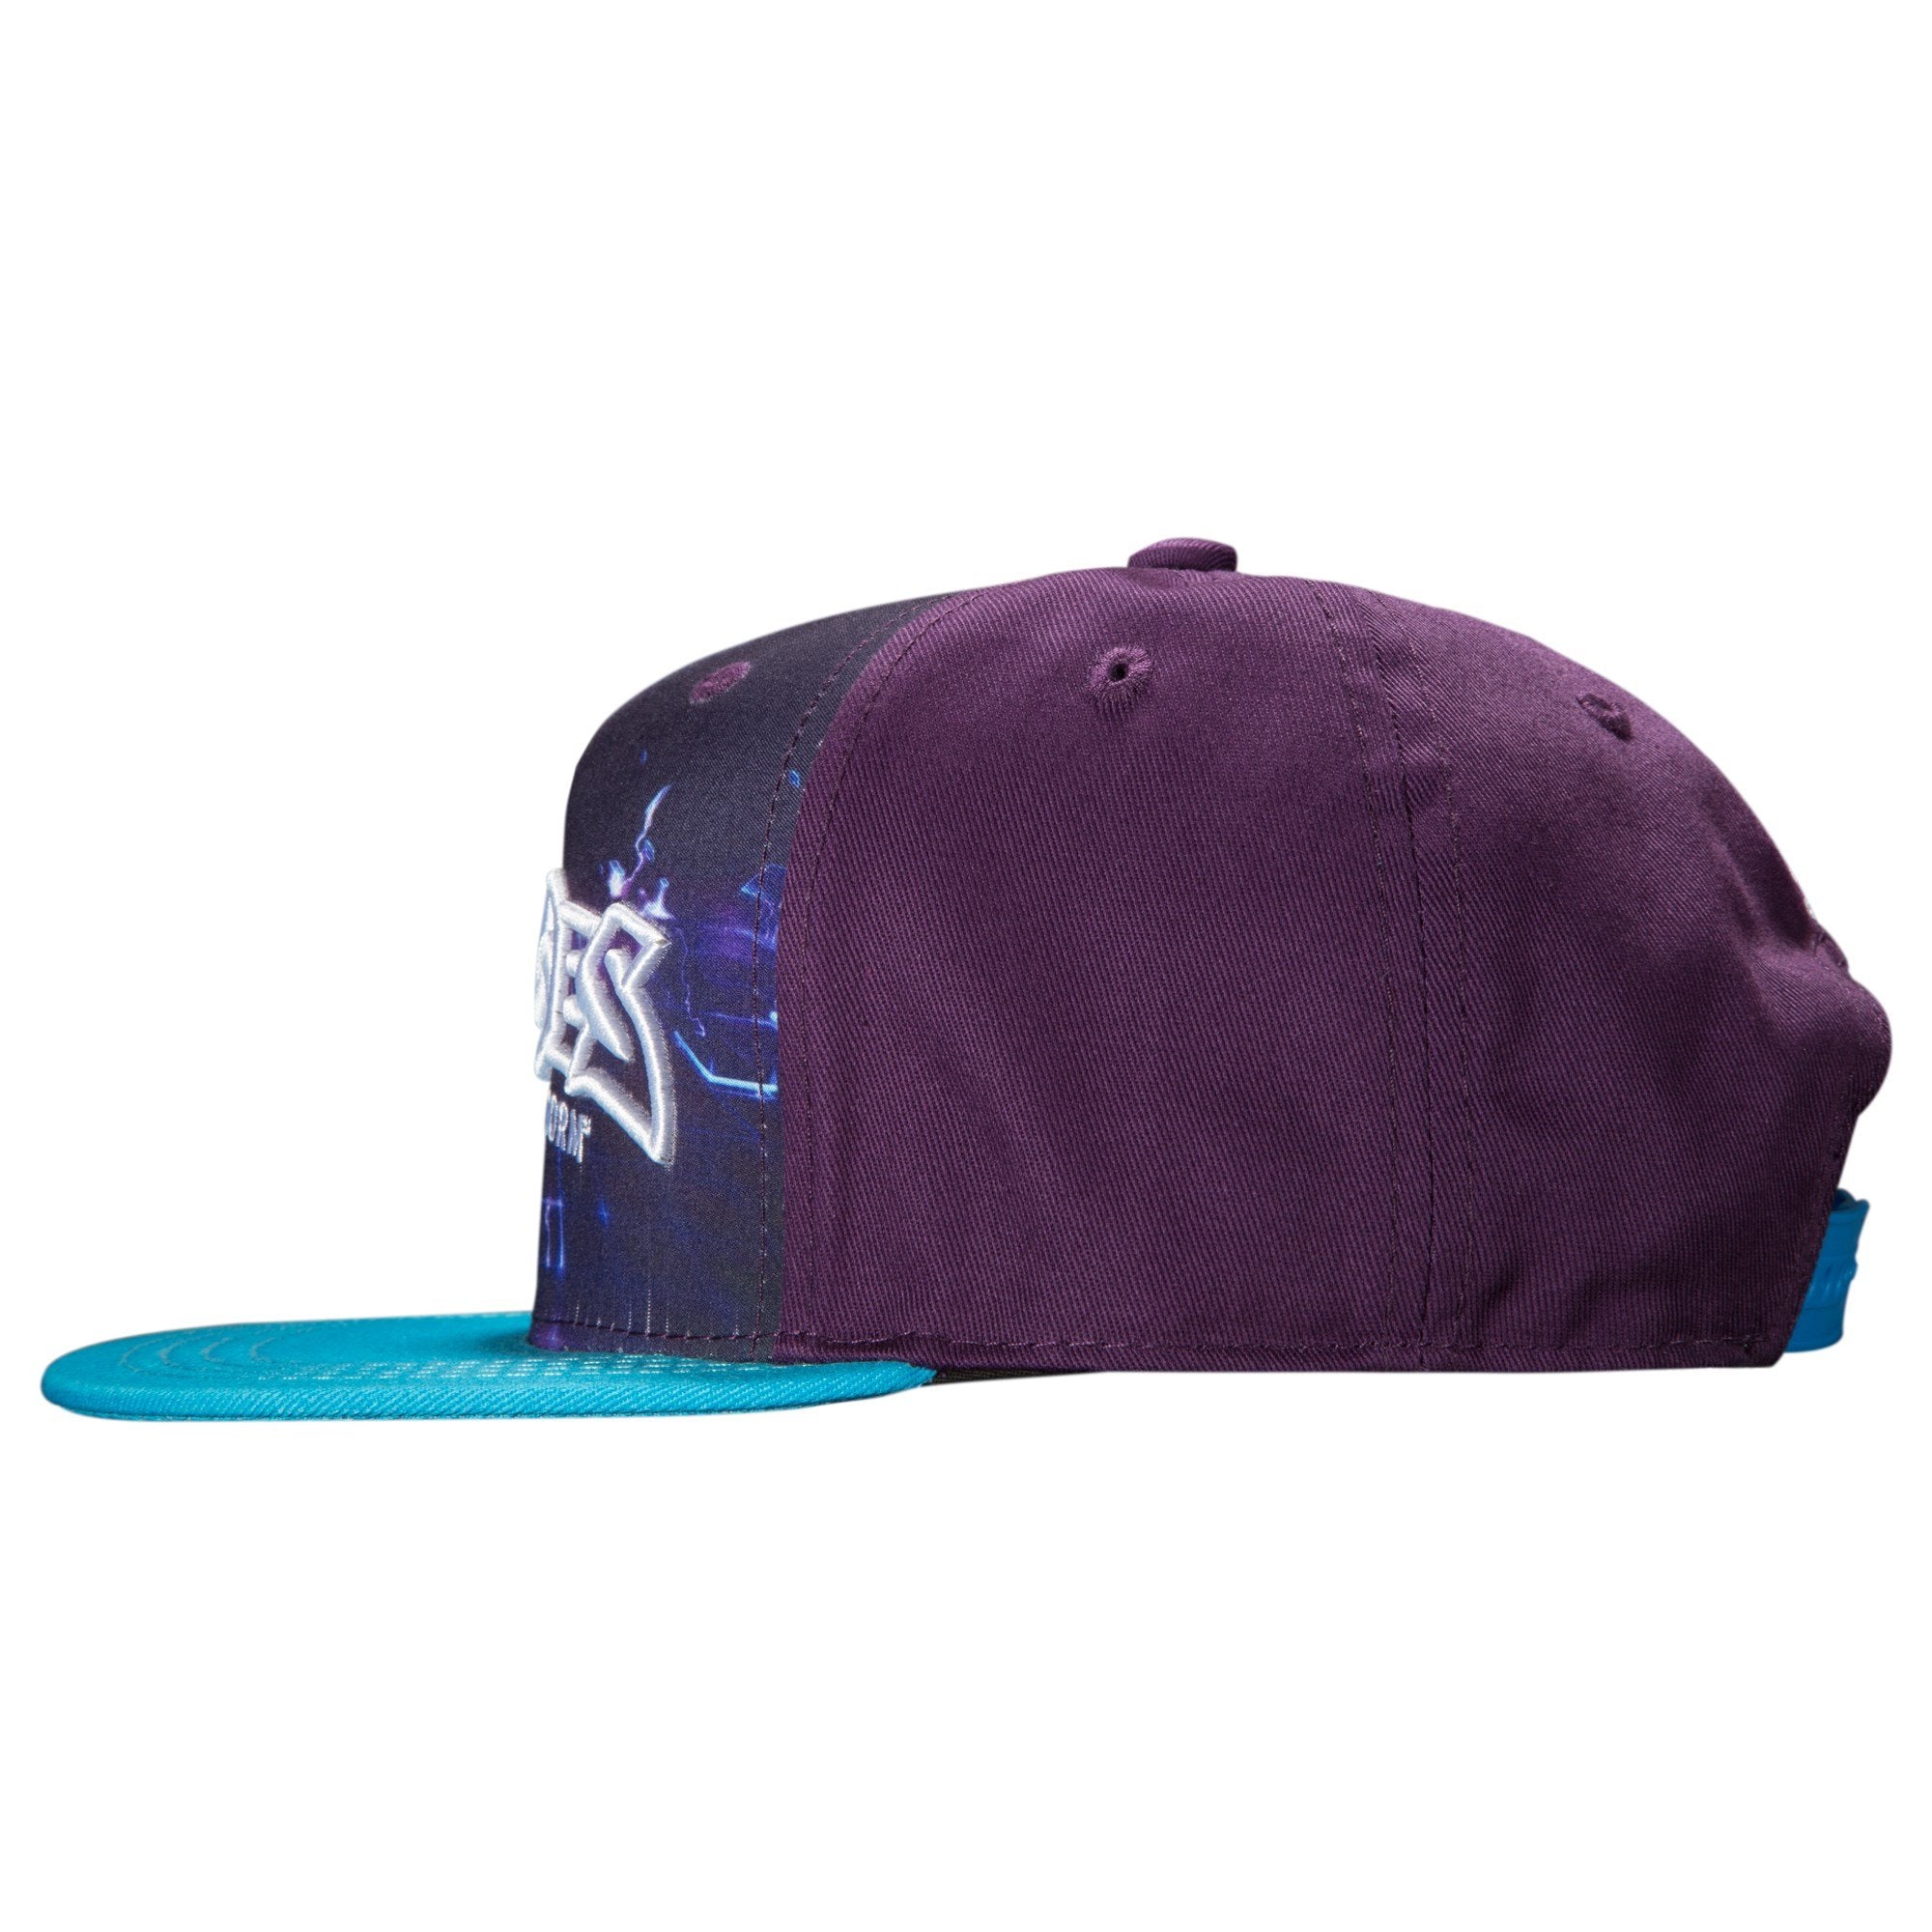 JINX Heroes of The Storm Space Grid Snapback Baseball Hat One Size Fits All